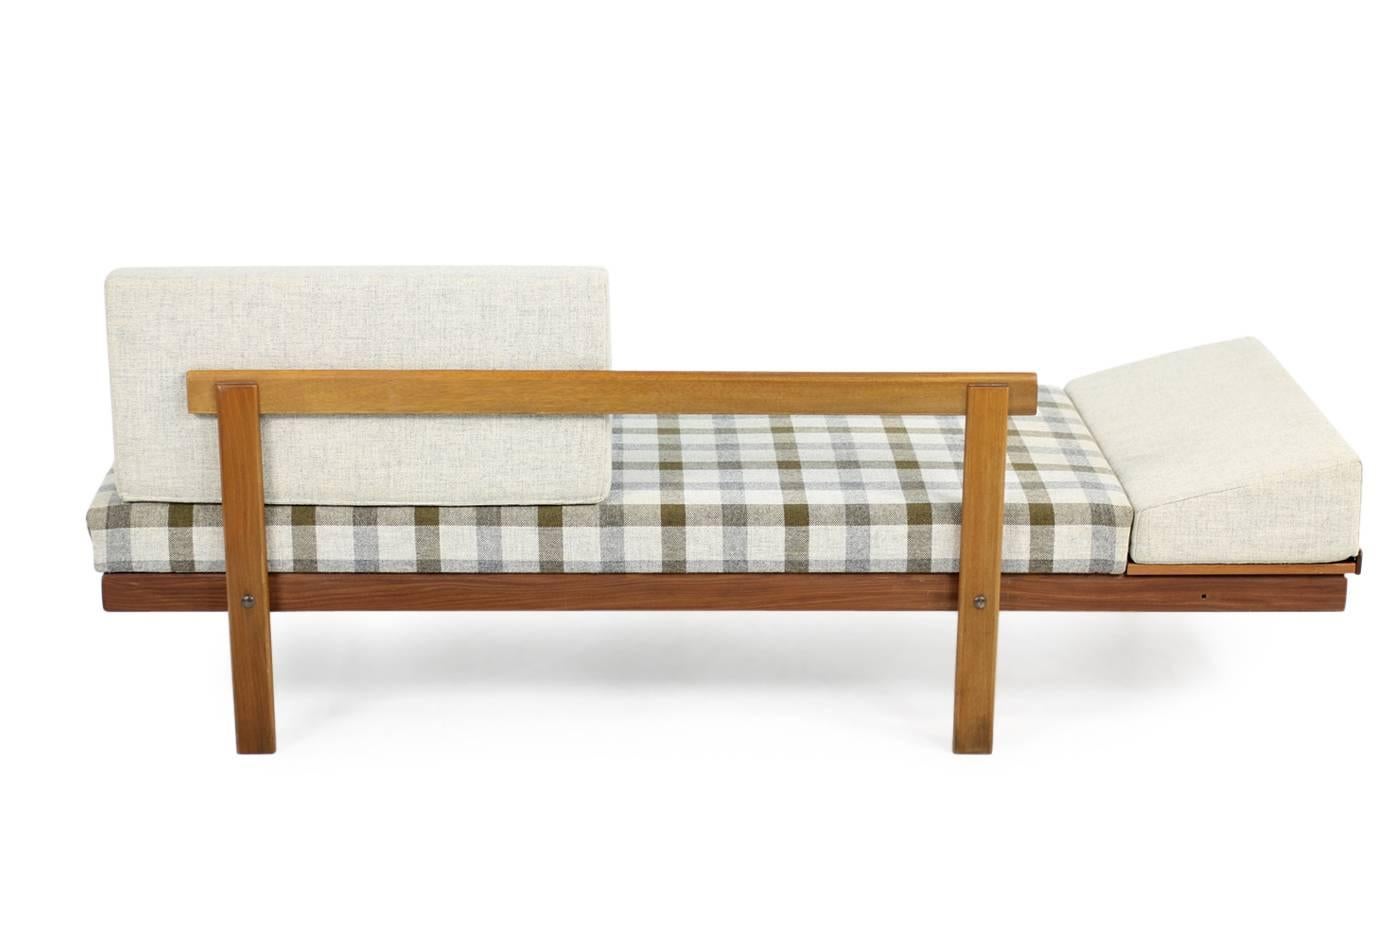 Beautiful Norwegian Mid-Century Modern daybed from the 1950s in fantastic authentic condition. Teak & Beech base in great condition, also possible using it as a daybed. Cool storage unit under the side table.

Sofa dimensions: W x D x H 192 x 75 x